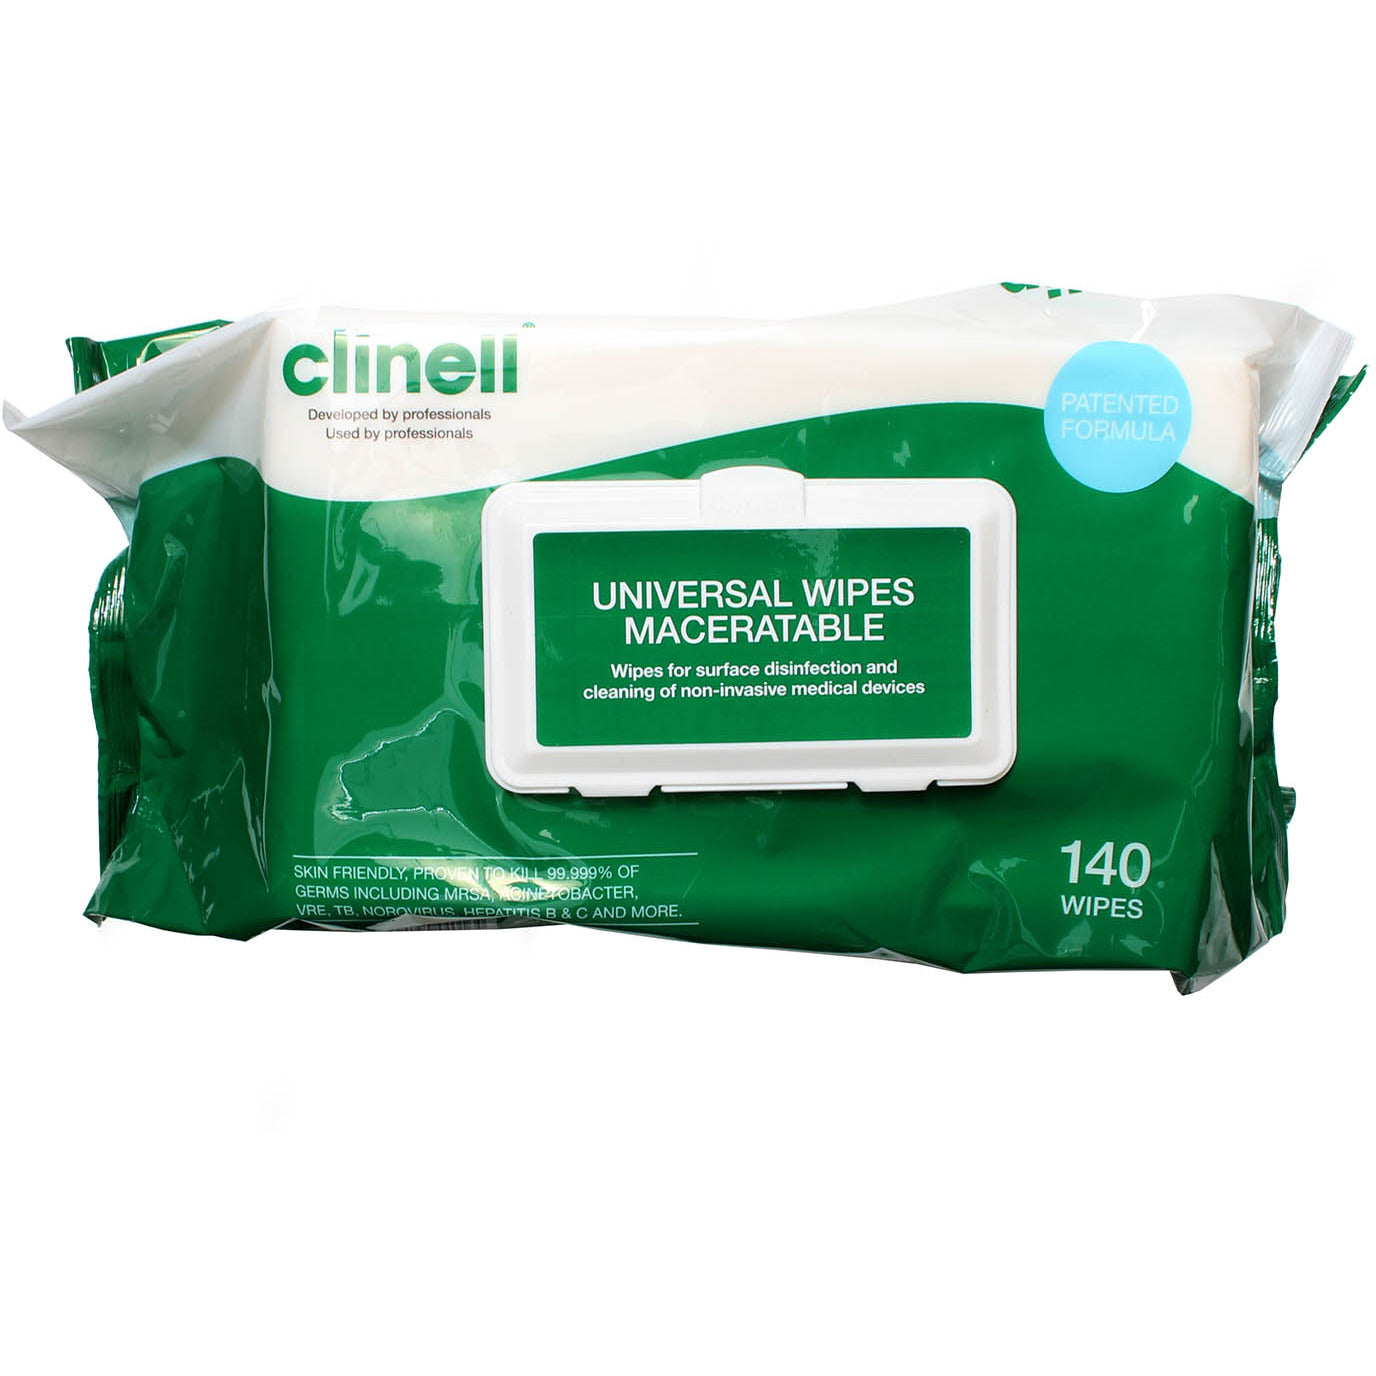 Clinell Universal Maceratable Wipes x 140